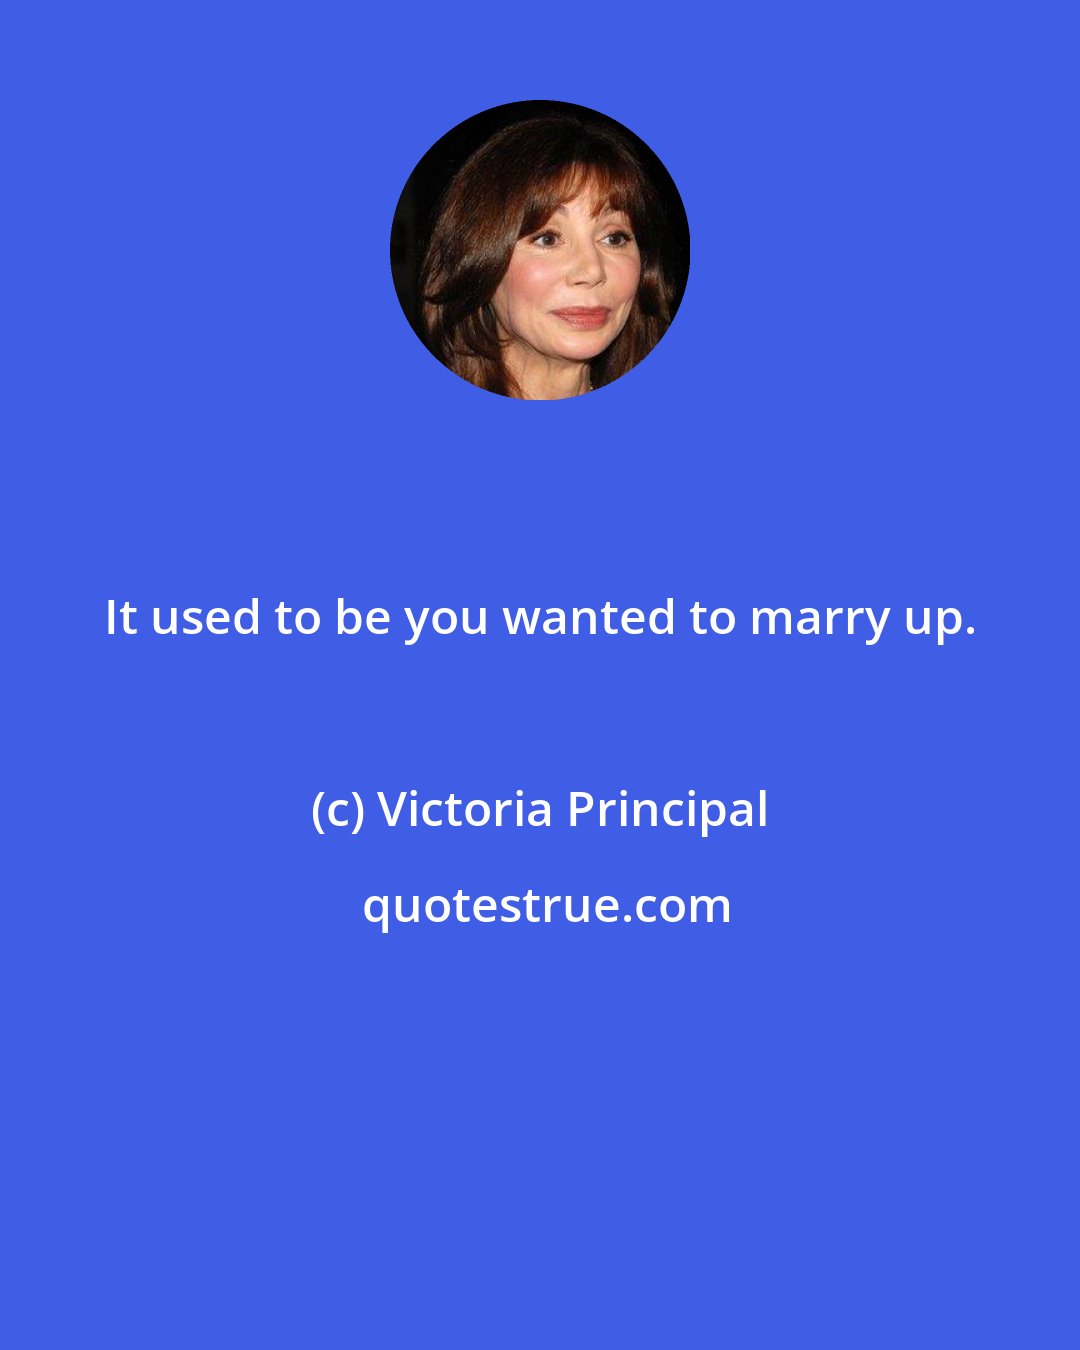 Victoria Principal: It used to be you wanted to marry up.